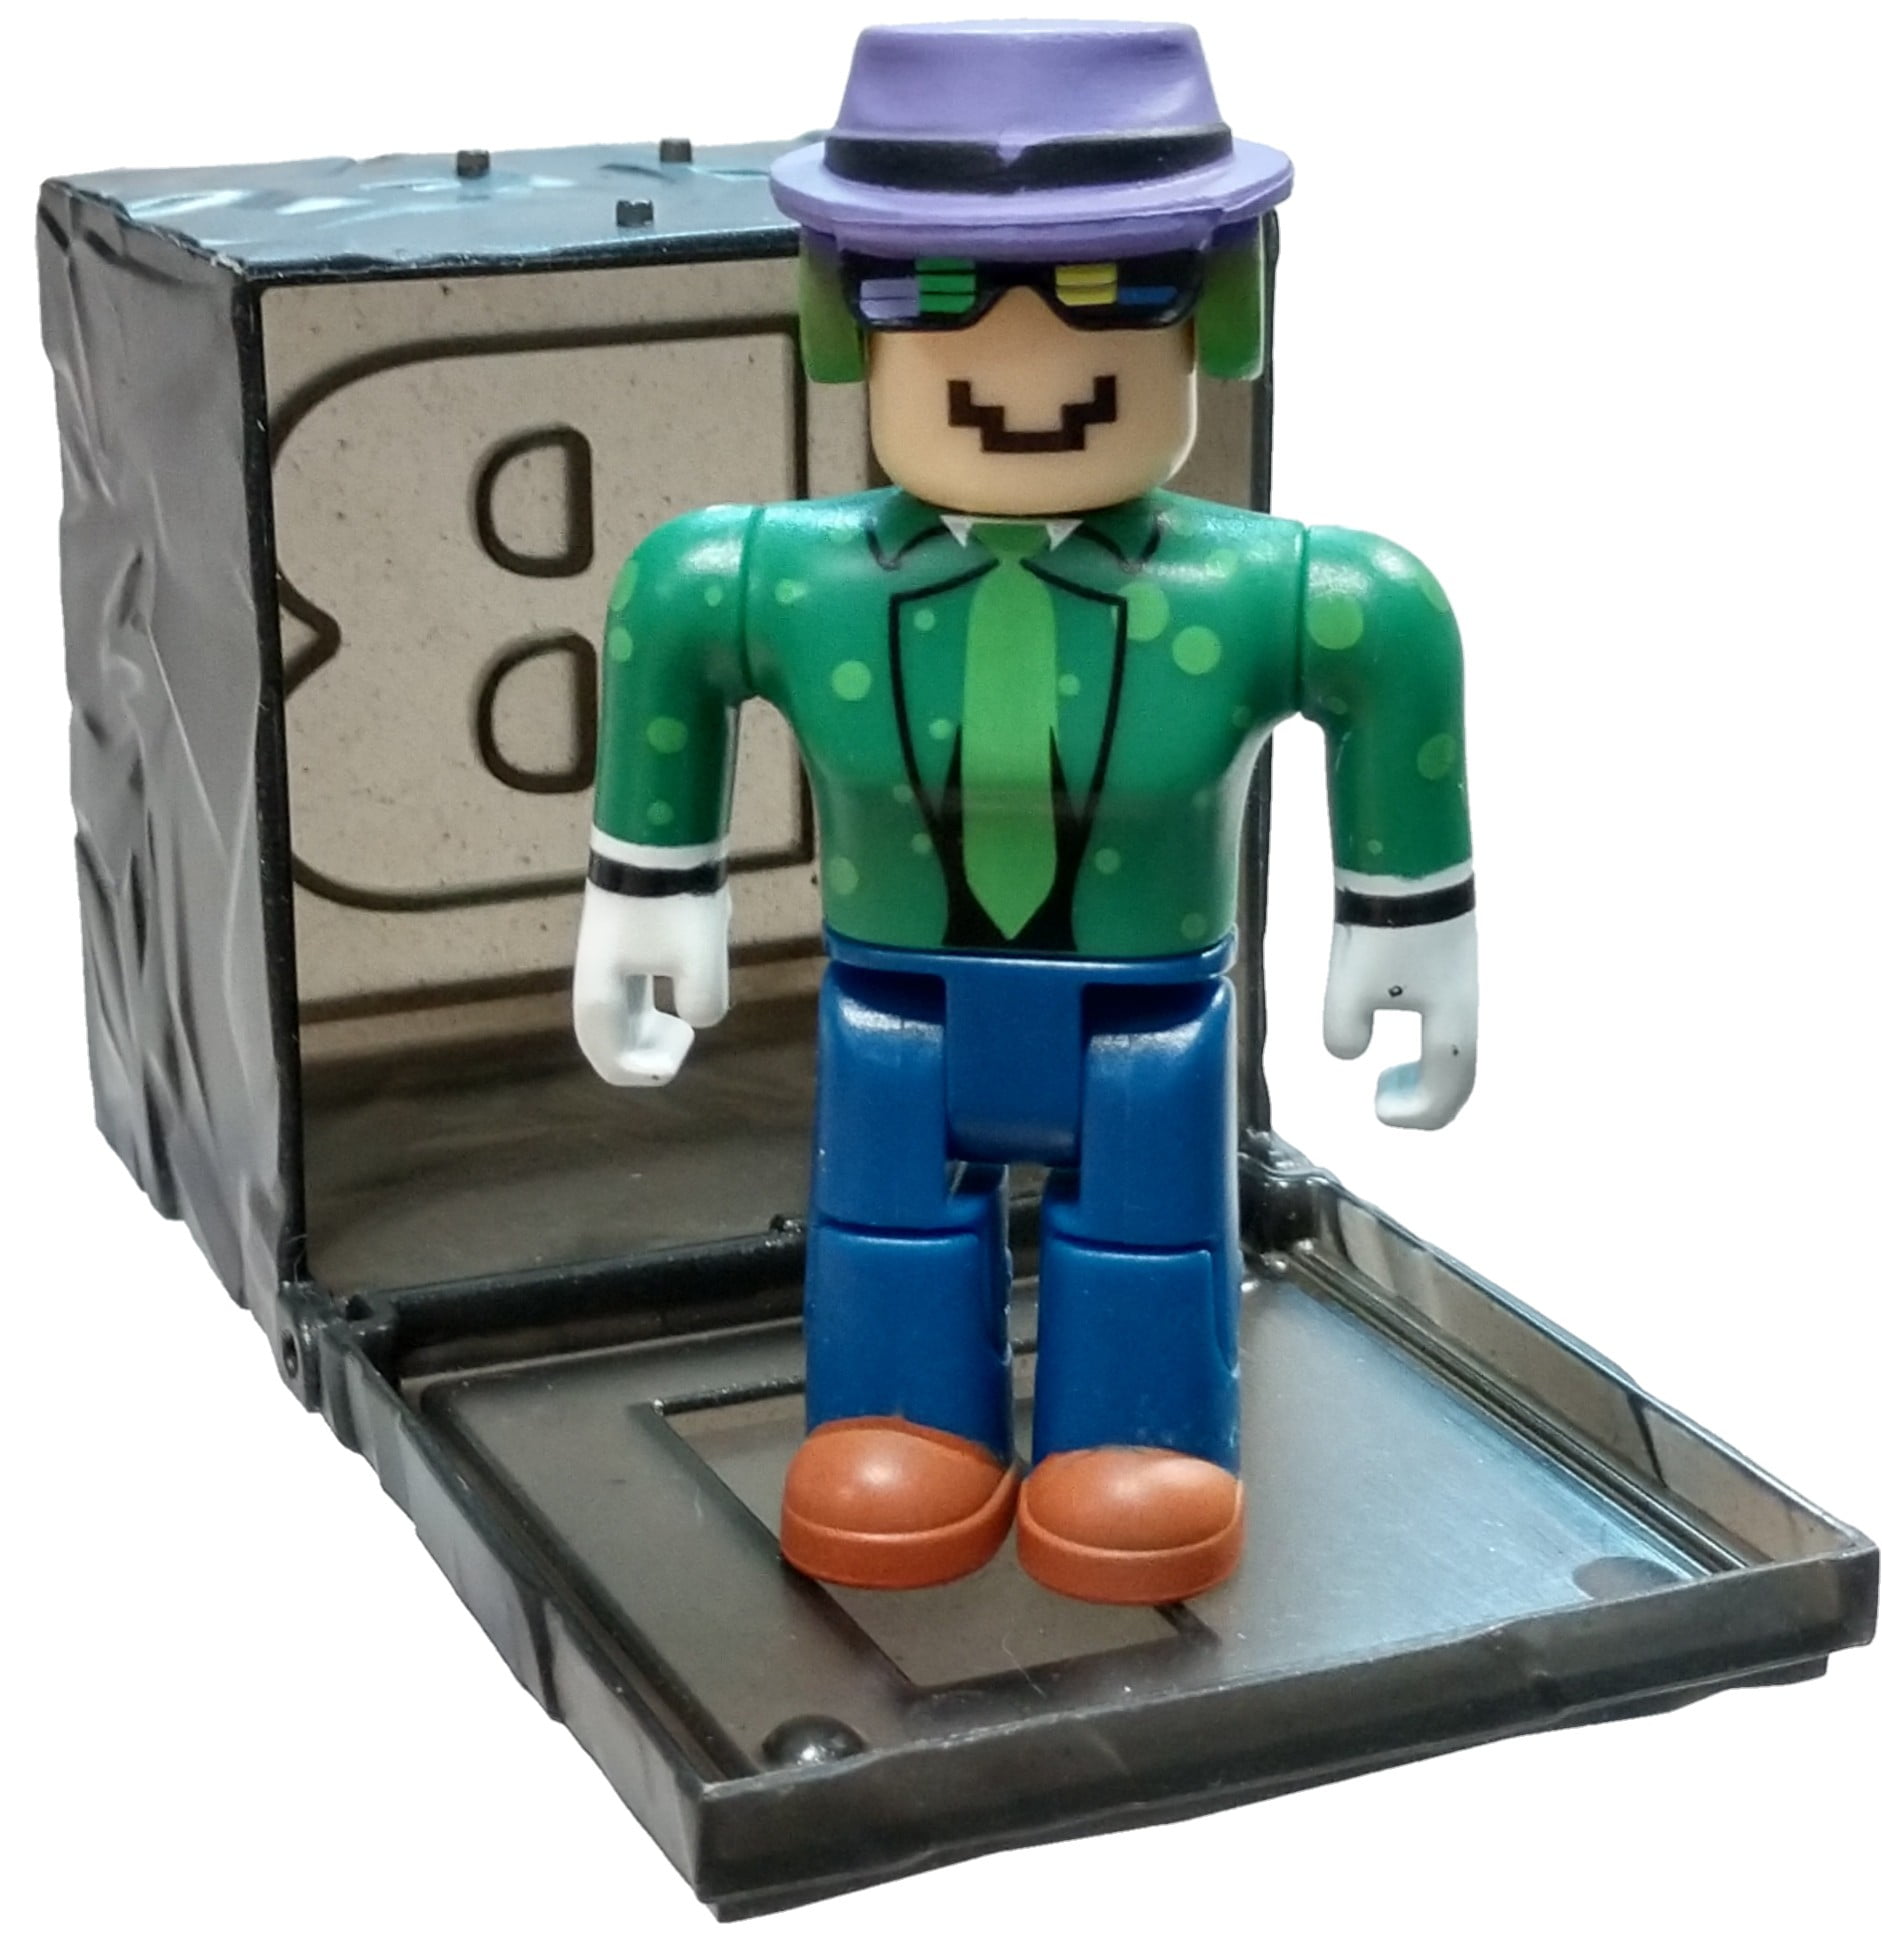 Roblox Series 7 Mrwindy Mini Figure With Black Cube And Online Code No Packaging Walmart Com Walmart Com - black roblox shirt codes fortnite news and guide